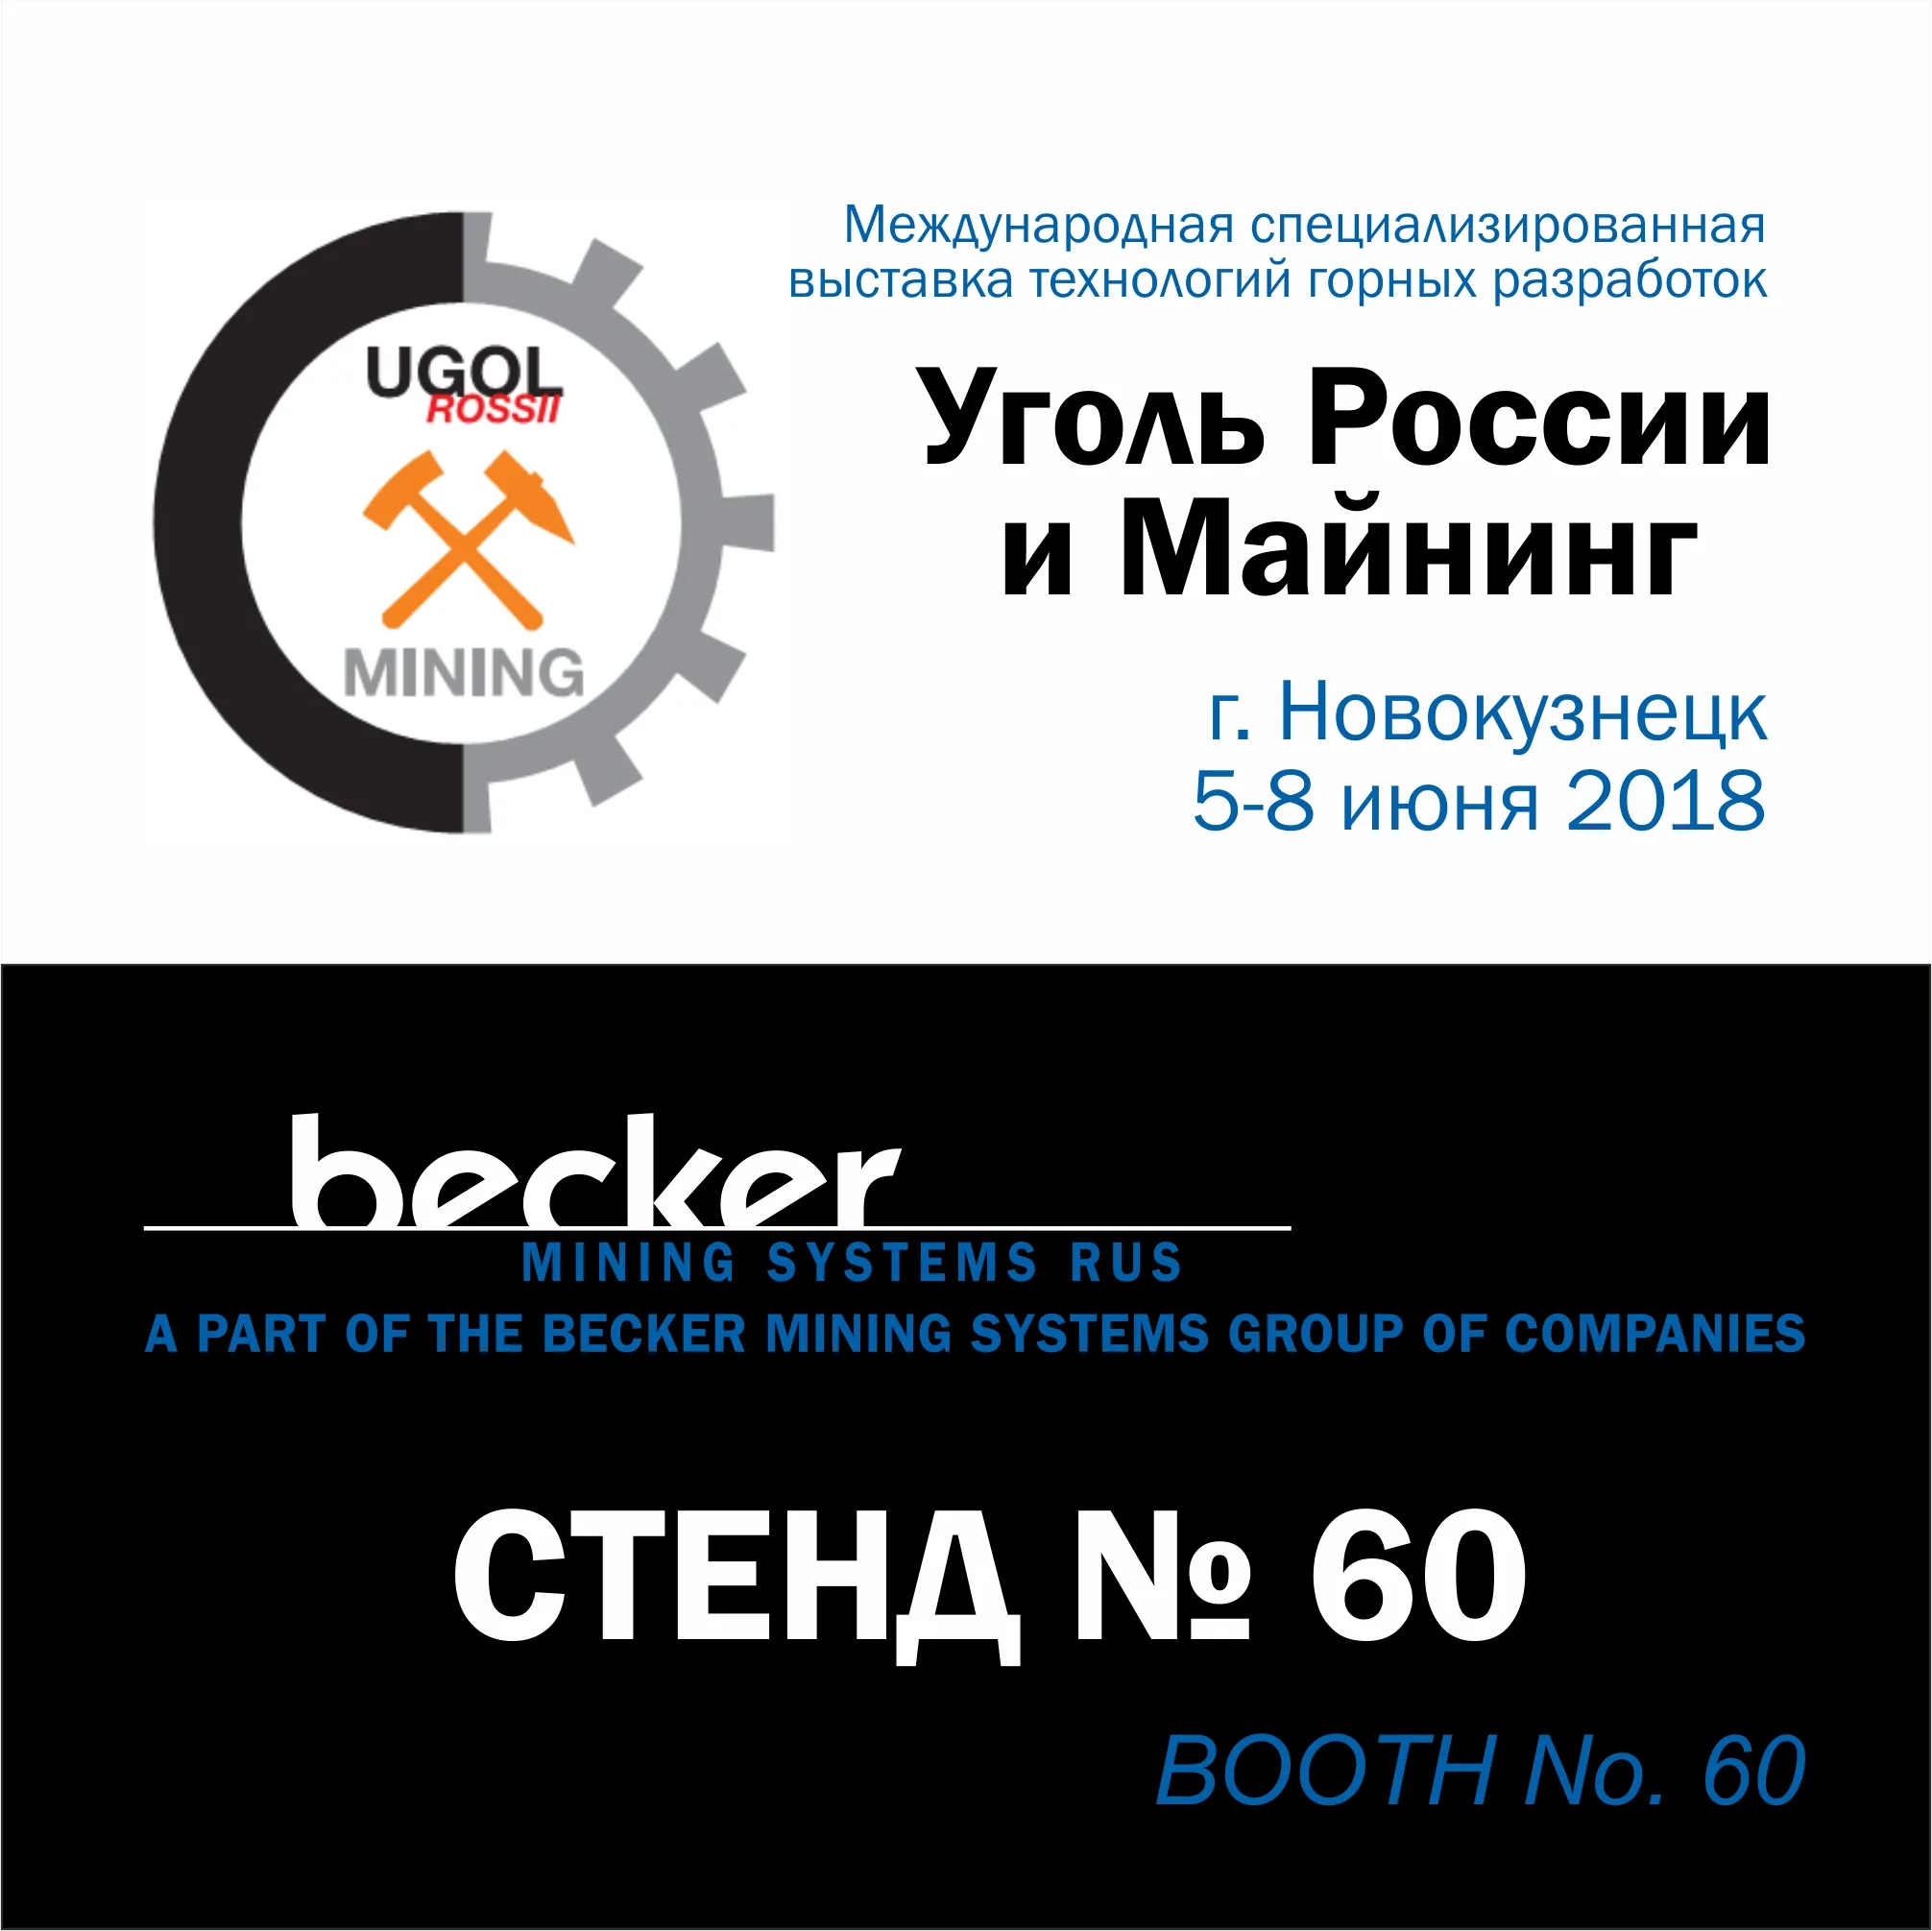 trade show and becker  logo of the trade show in russian